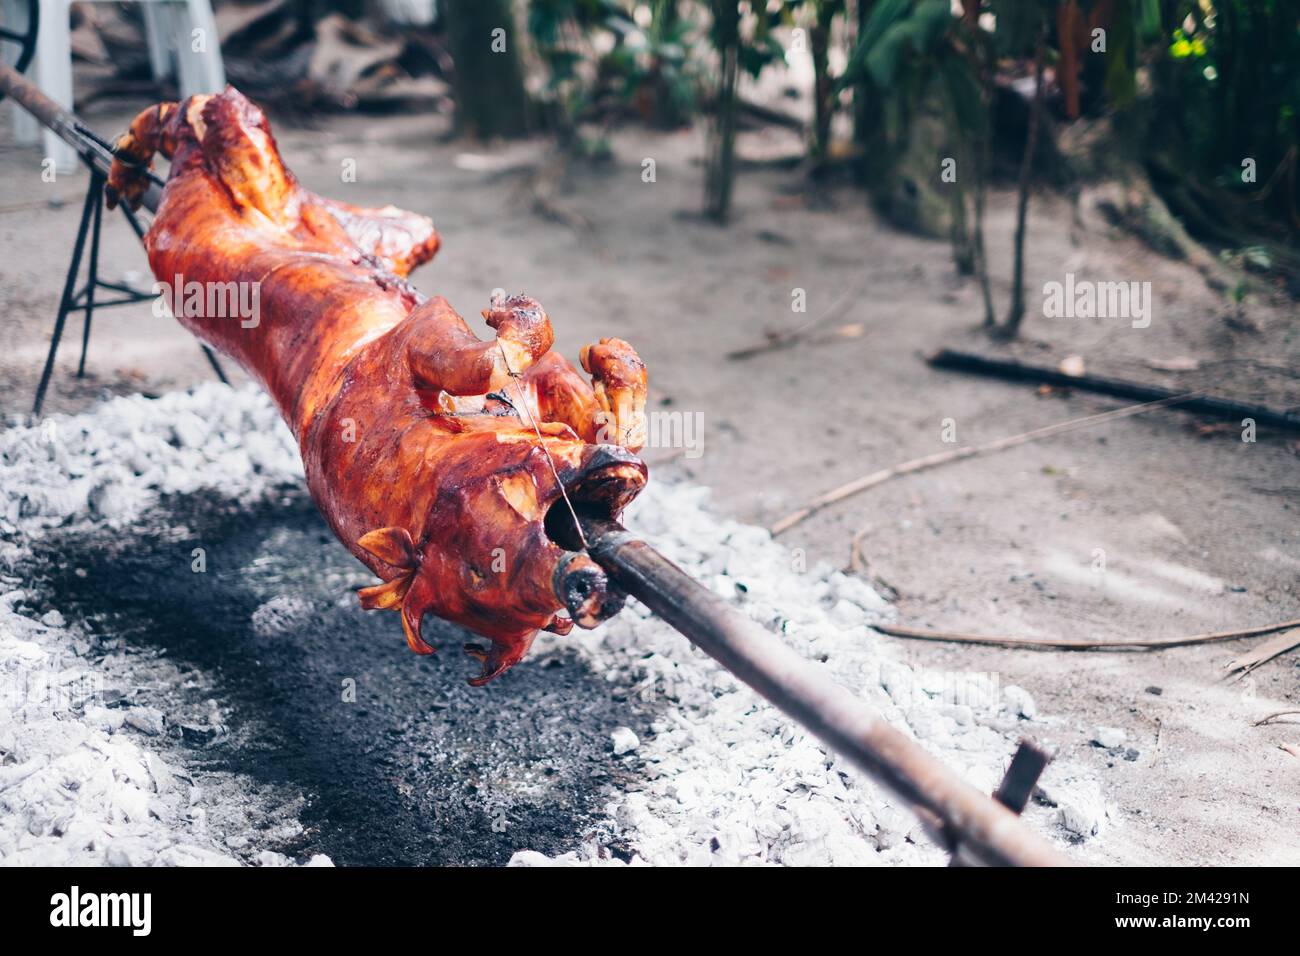 Slow cooking of the popular, all time favorite, delicious roasted crispy pig or Lechon Baboy under around burning charcoals using makeshift manual rot Stock Photo